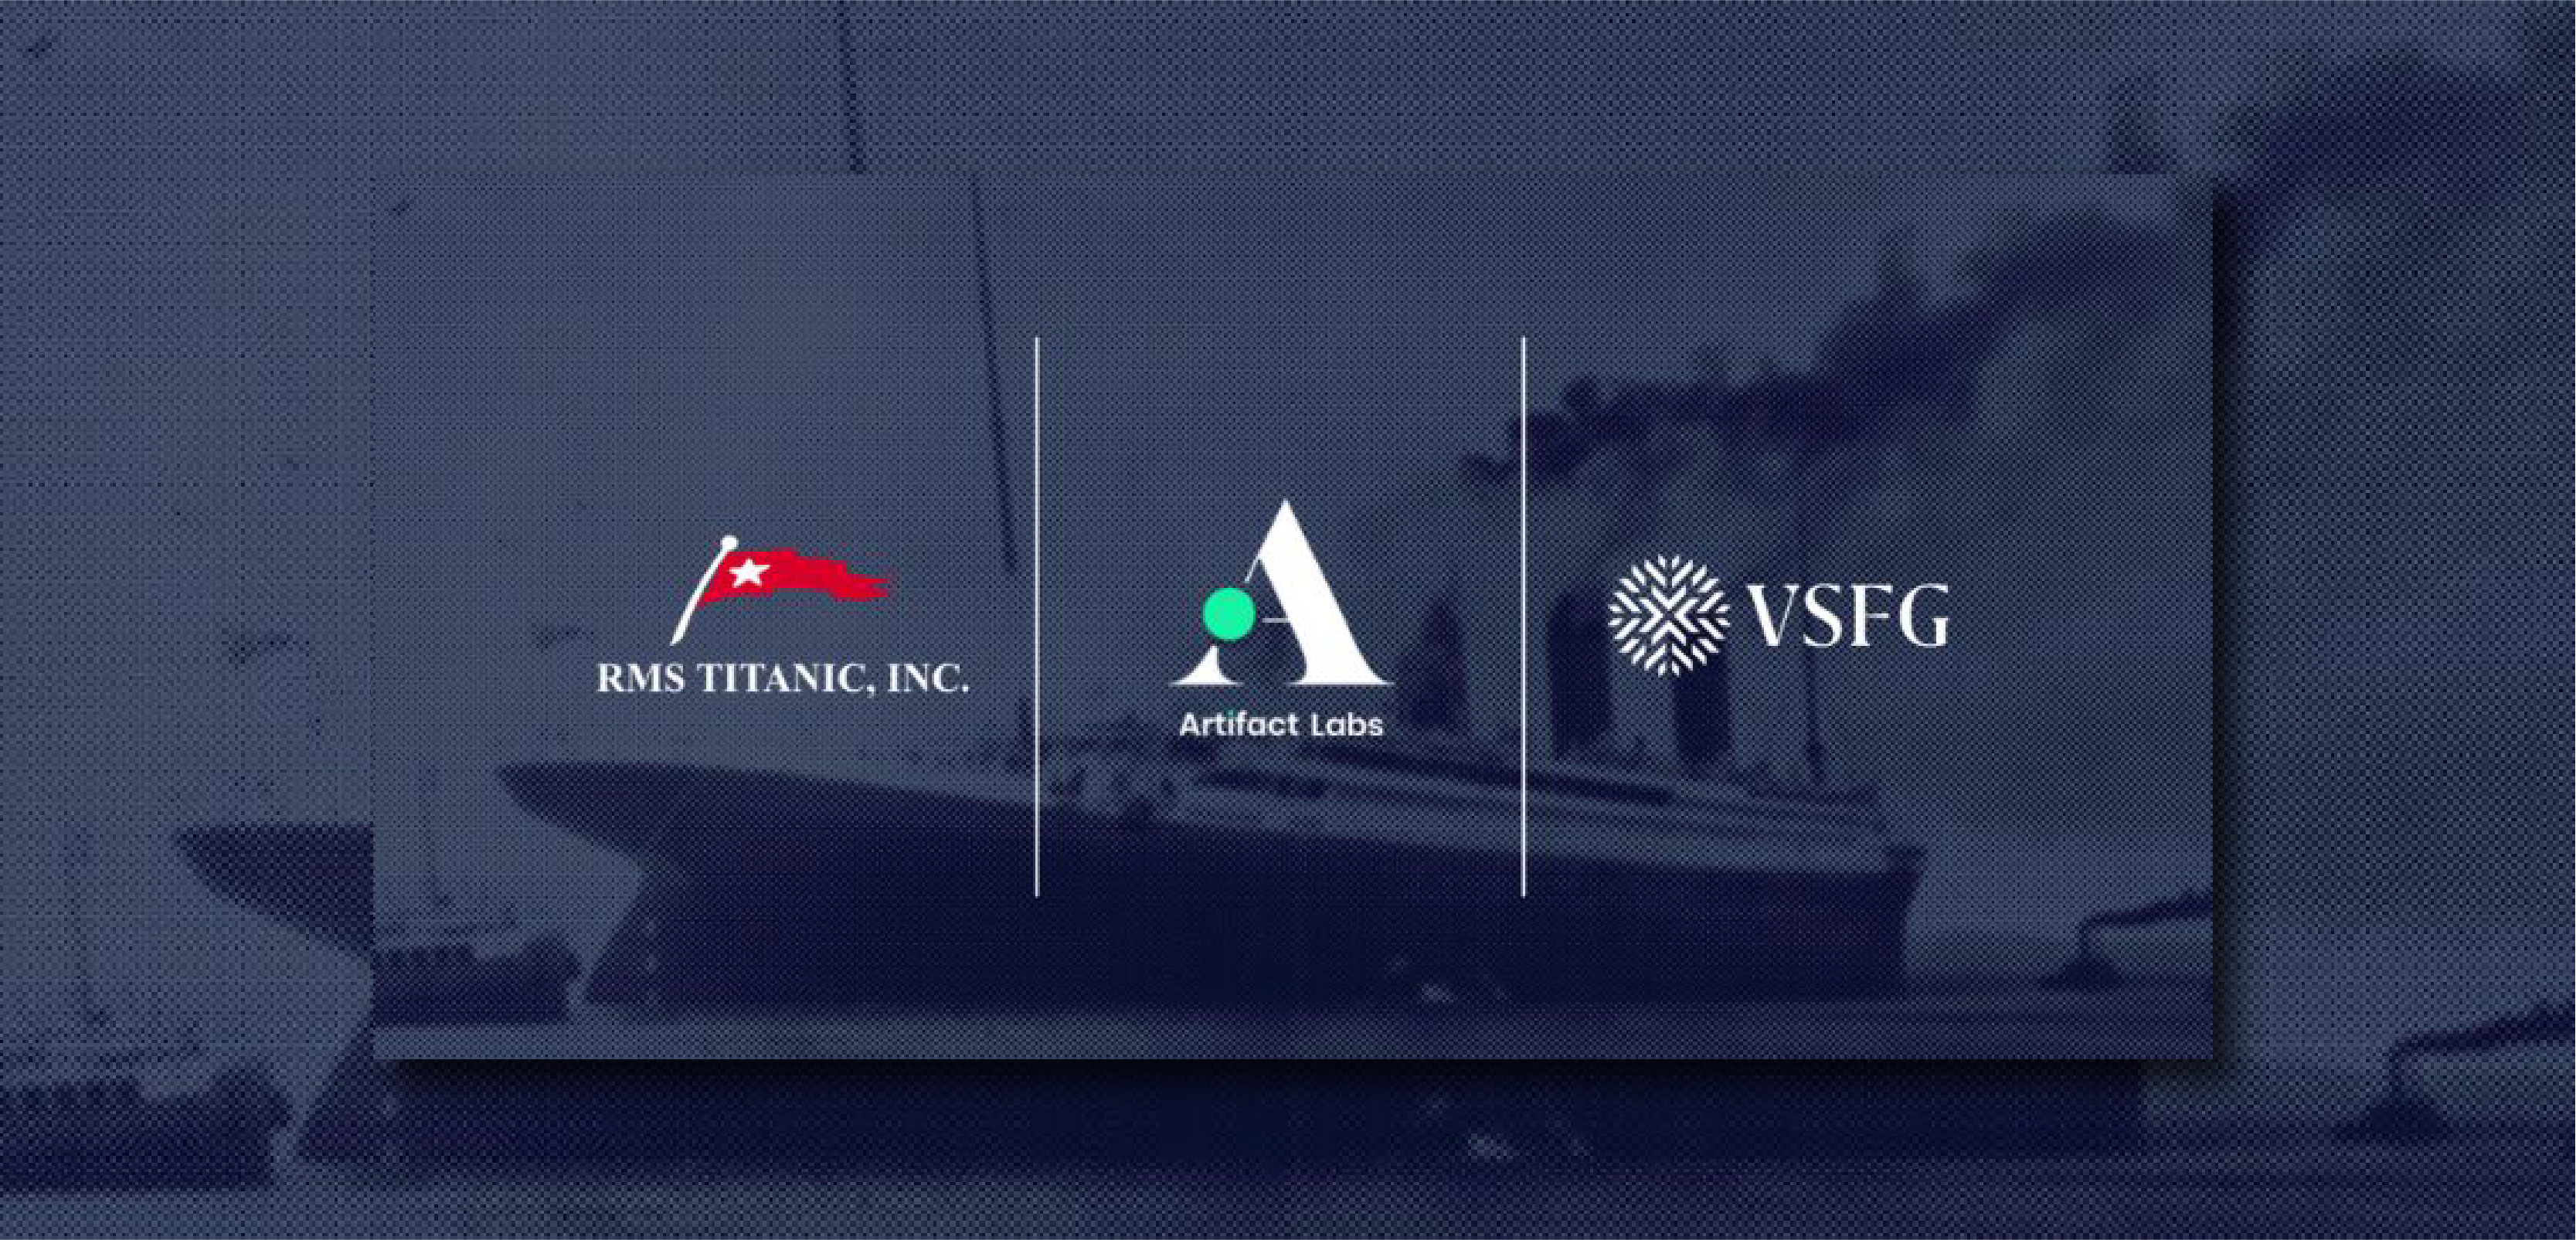 RMS Titanic, Inc., VSFG, and Artifact Labs Partner To Bring The Titanic Into Web3